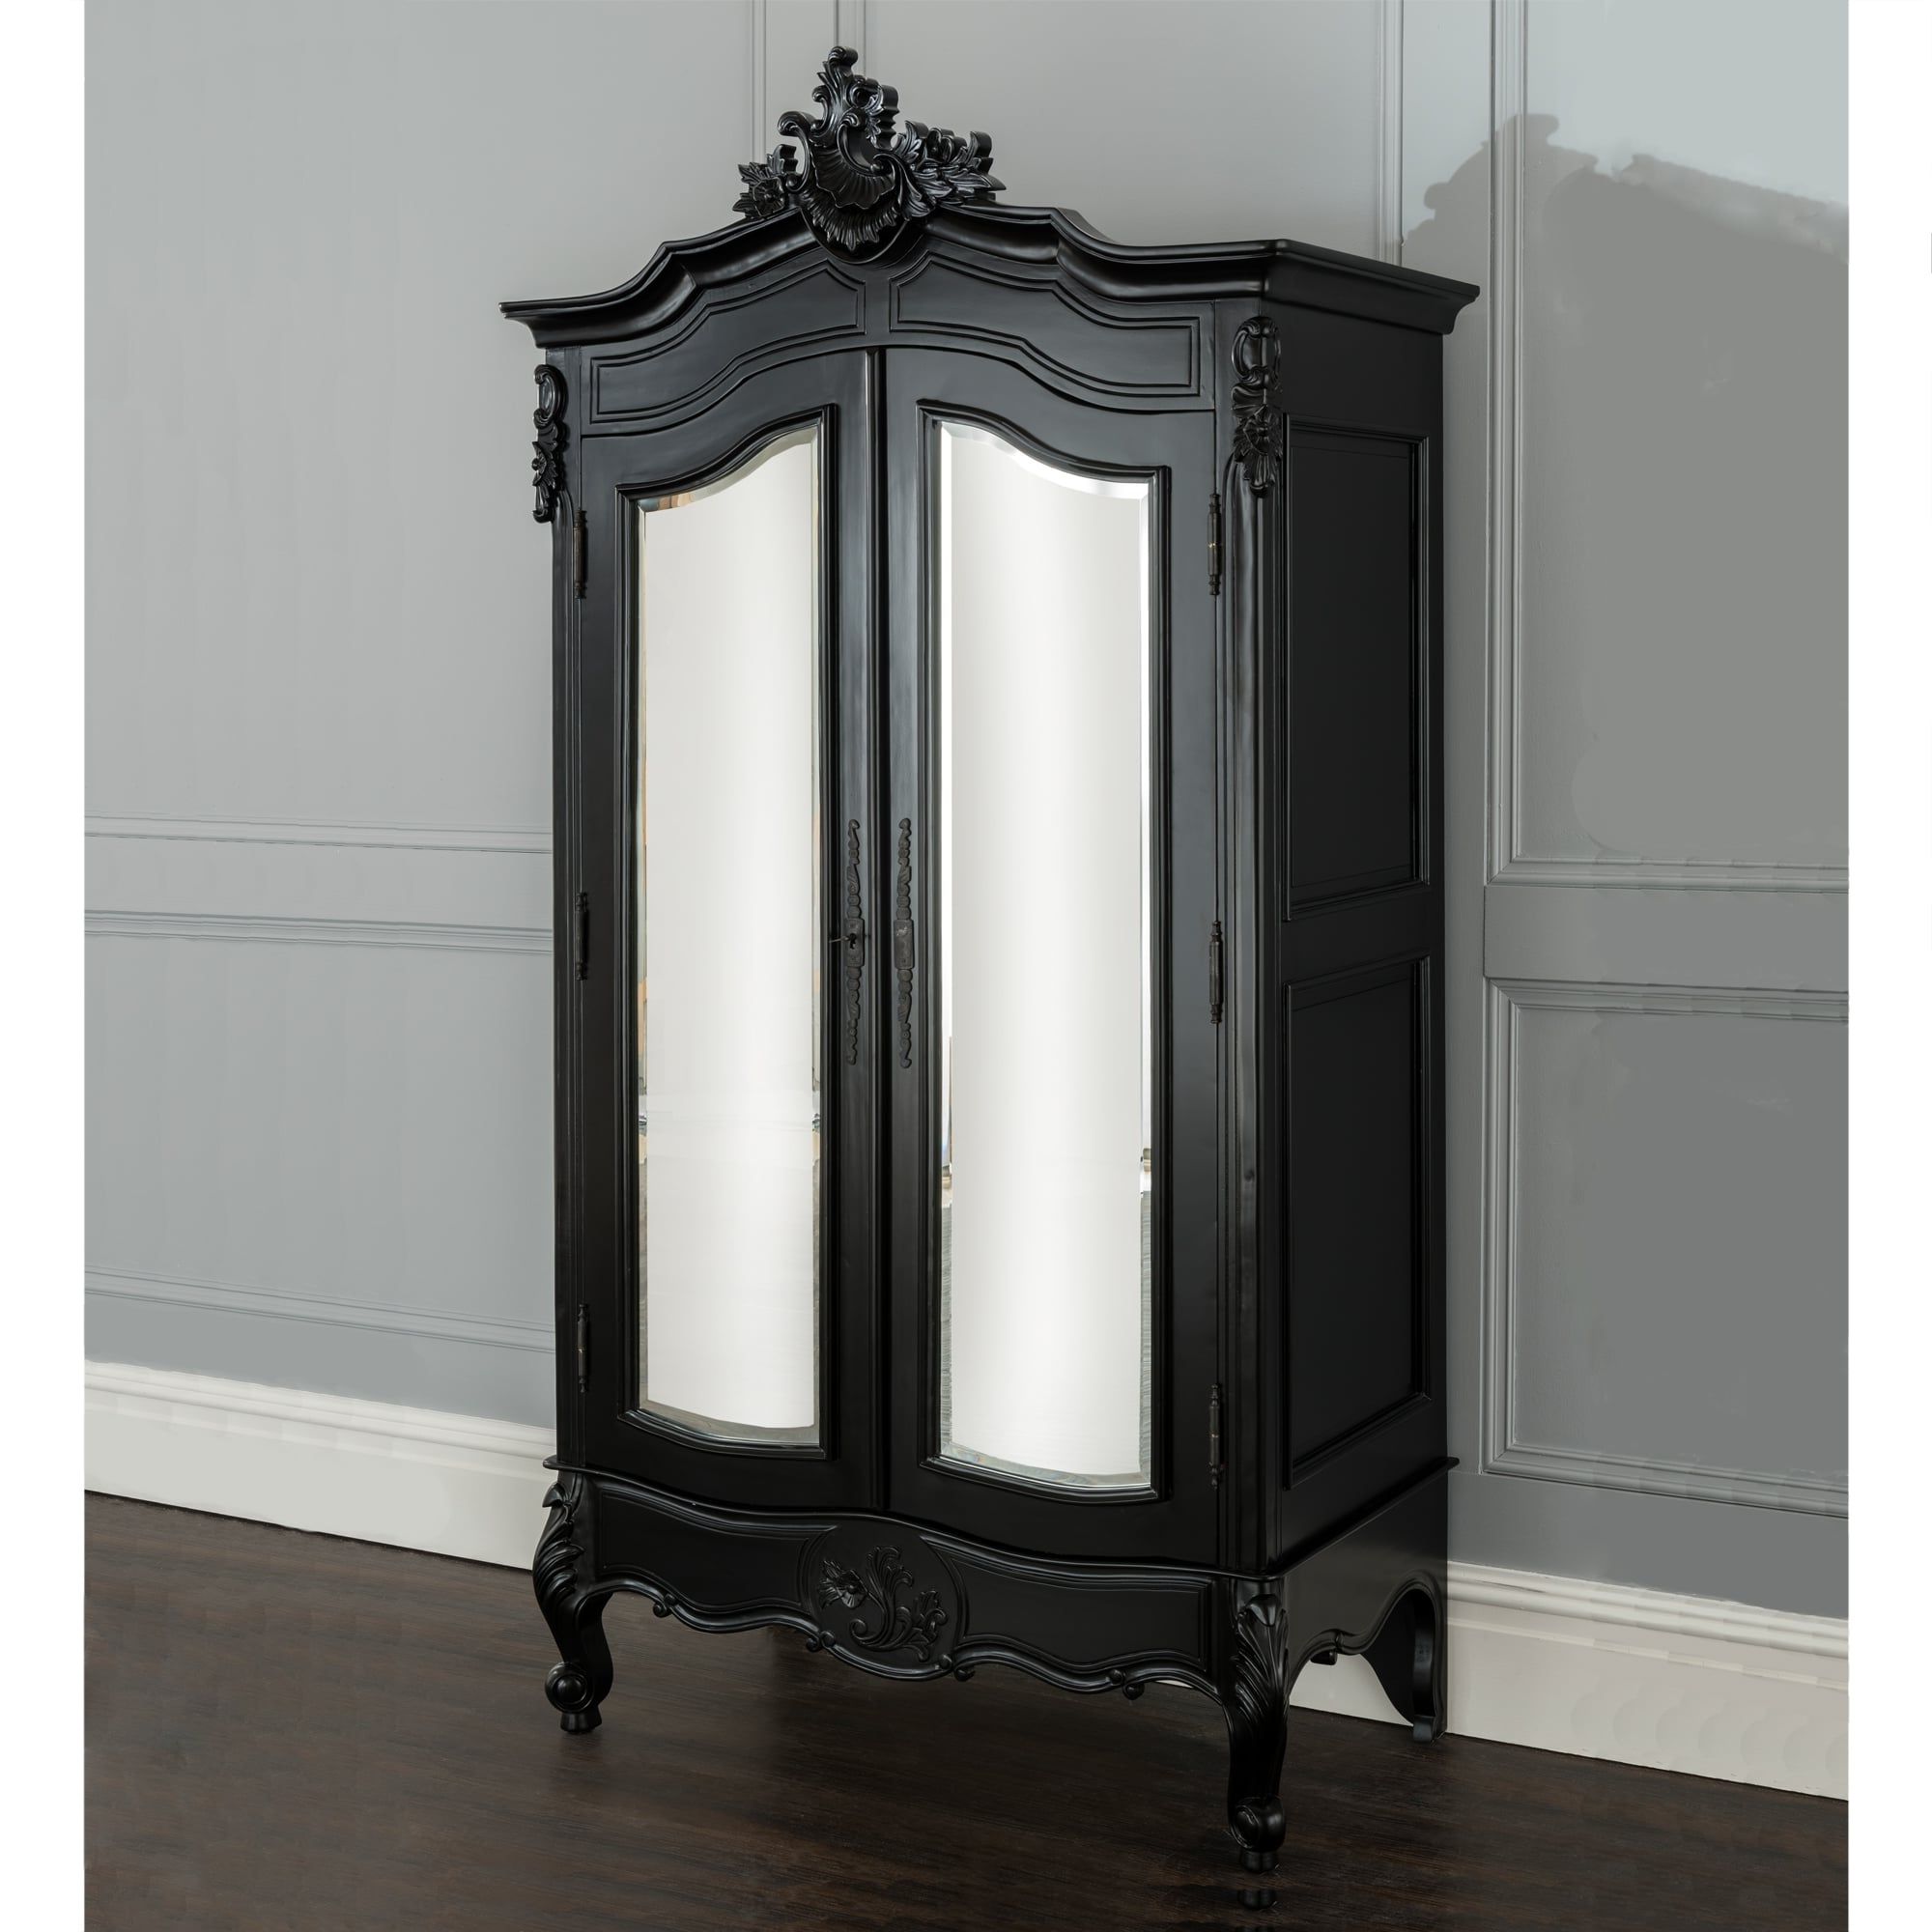 La Rochelle Antique French Wardrobe | Black Furniture Collection Inside Black French Style Wardrobes (View 6 of 20)